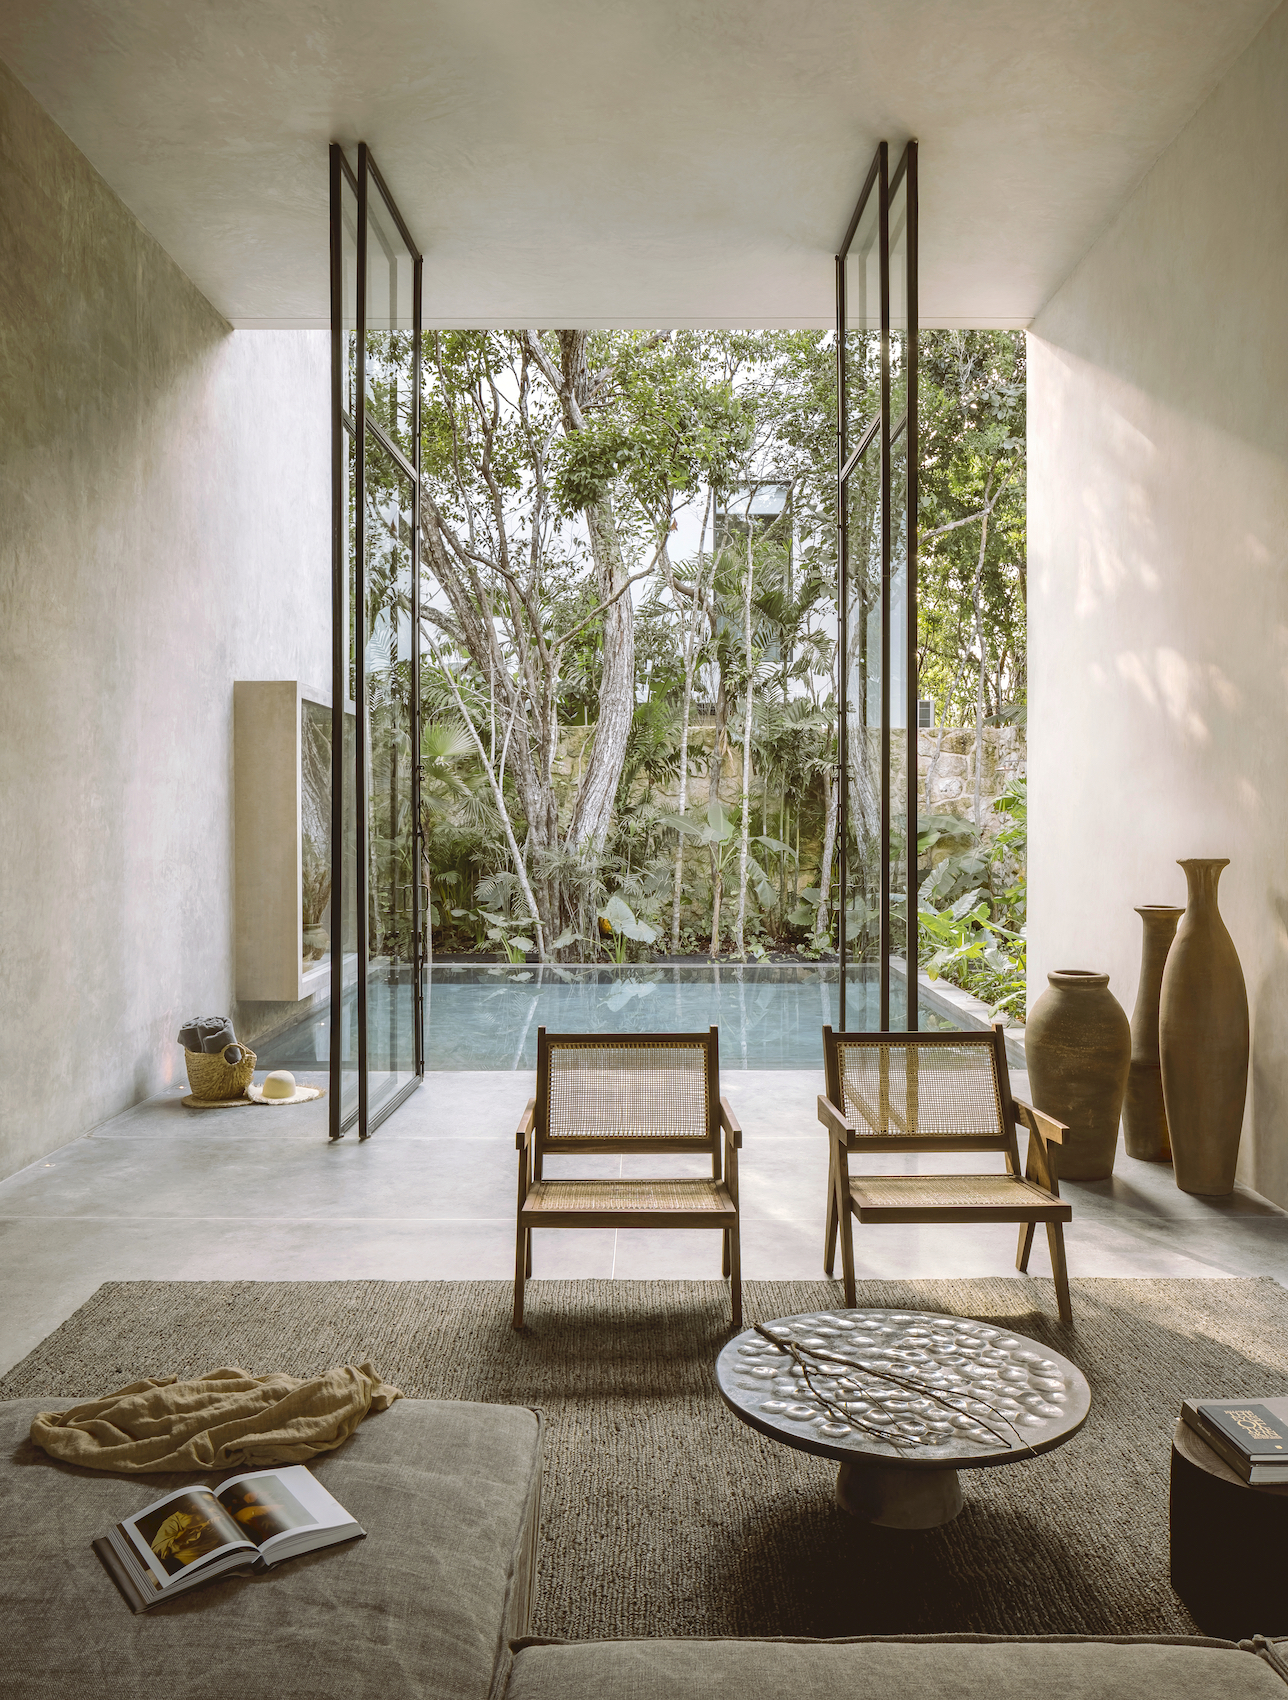 Aviv House in Tulum, Mexico, a Tropical Modernist house from Concrete Jungle by gestalten in Effect Magazine